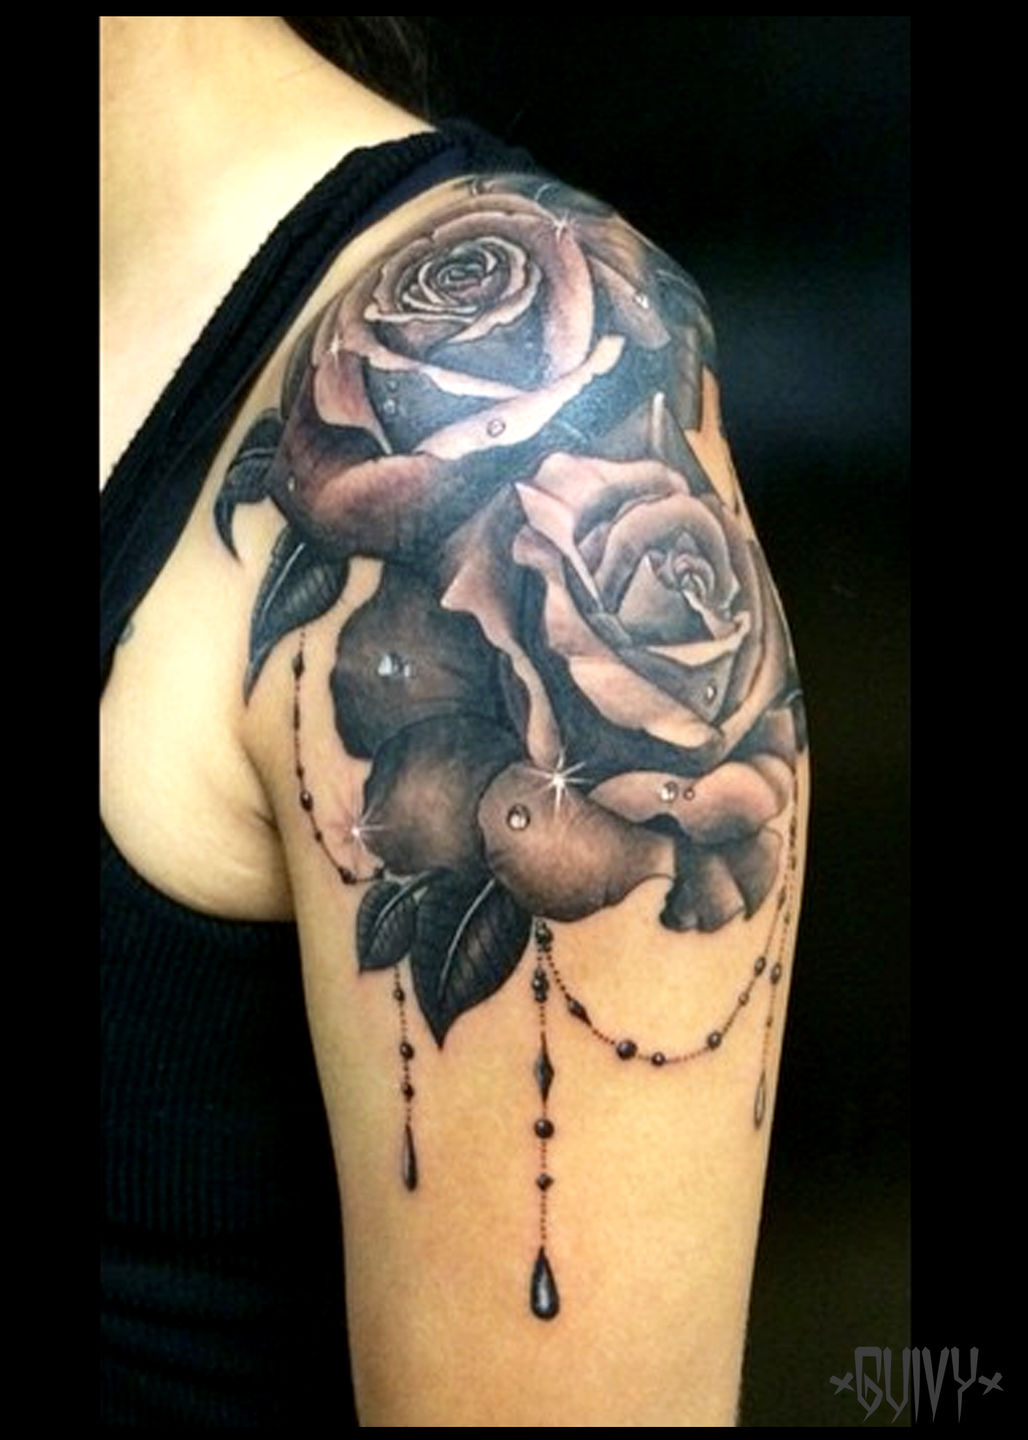 Tattoo uploaded by Stacie Mayer  Color realistic rose covered in water  droplets Tattoo by Kyle Cotterman realism colorrealism KyleCotterman  rose flower waterdrops  Tattoodo